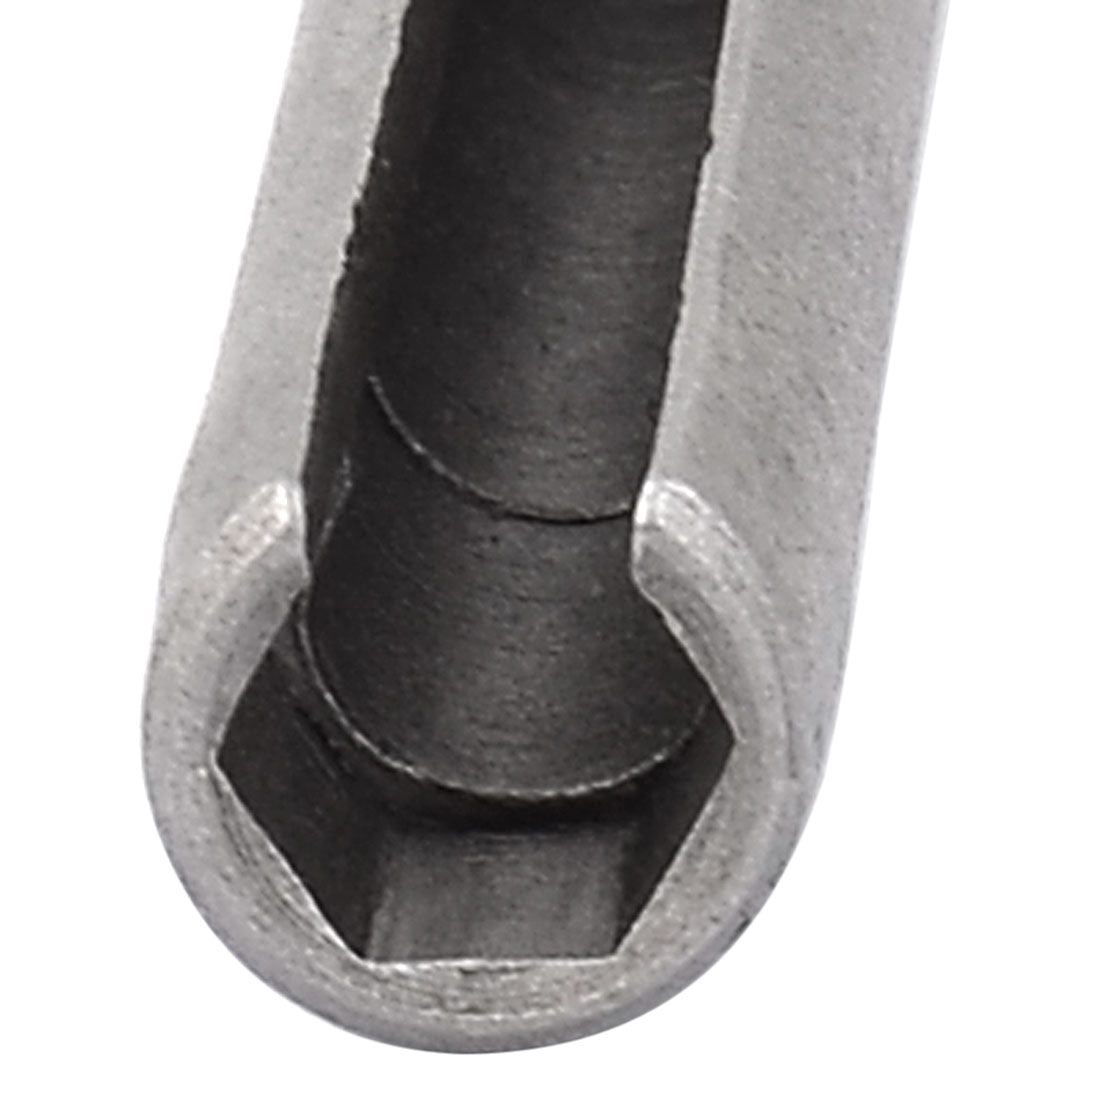 Uxcell Uxcell 17mm Hex Nut Socket Slotted Extension Driver Bit Adapter 135mm Long